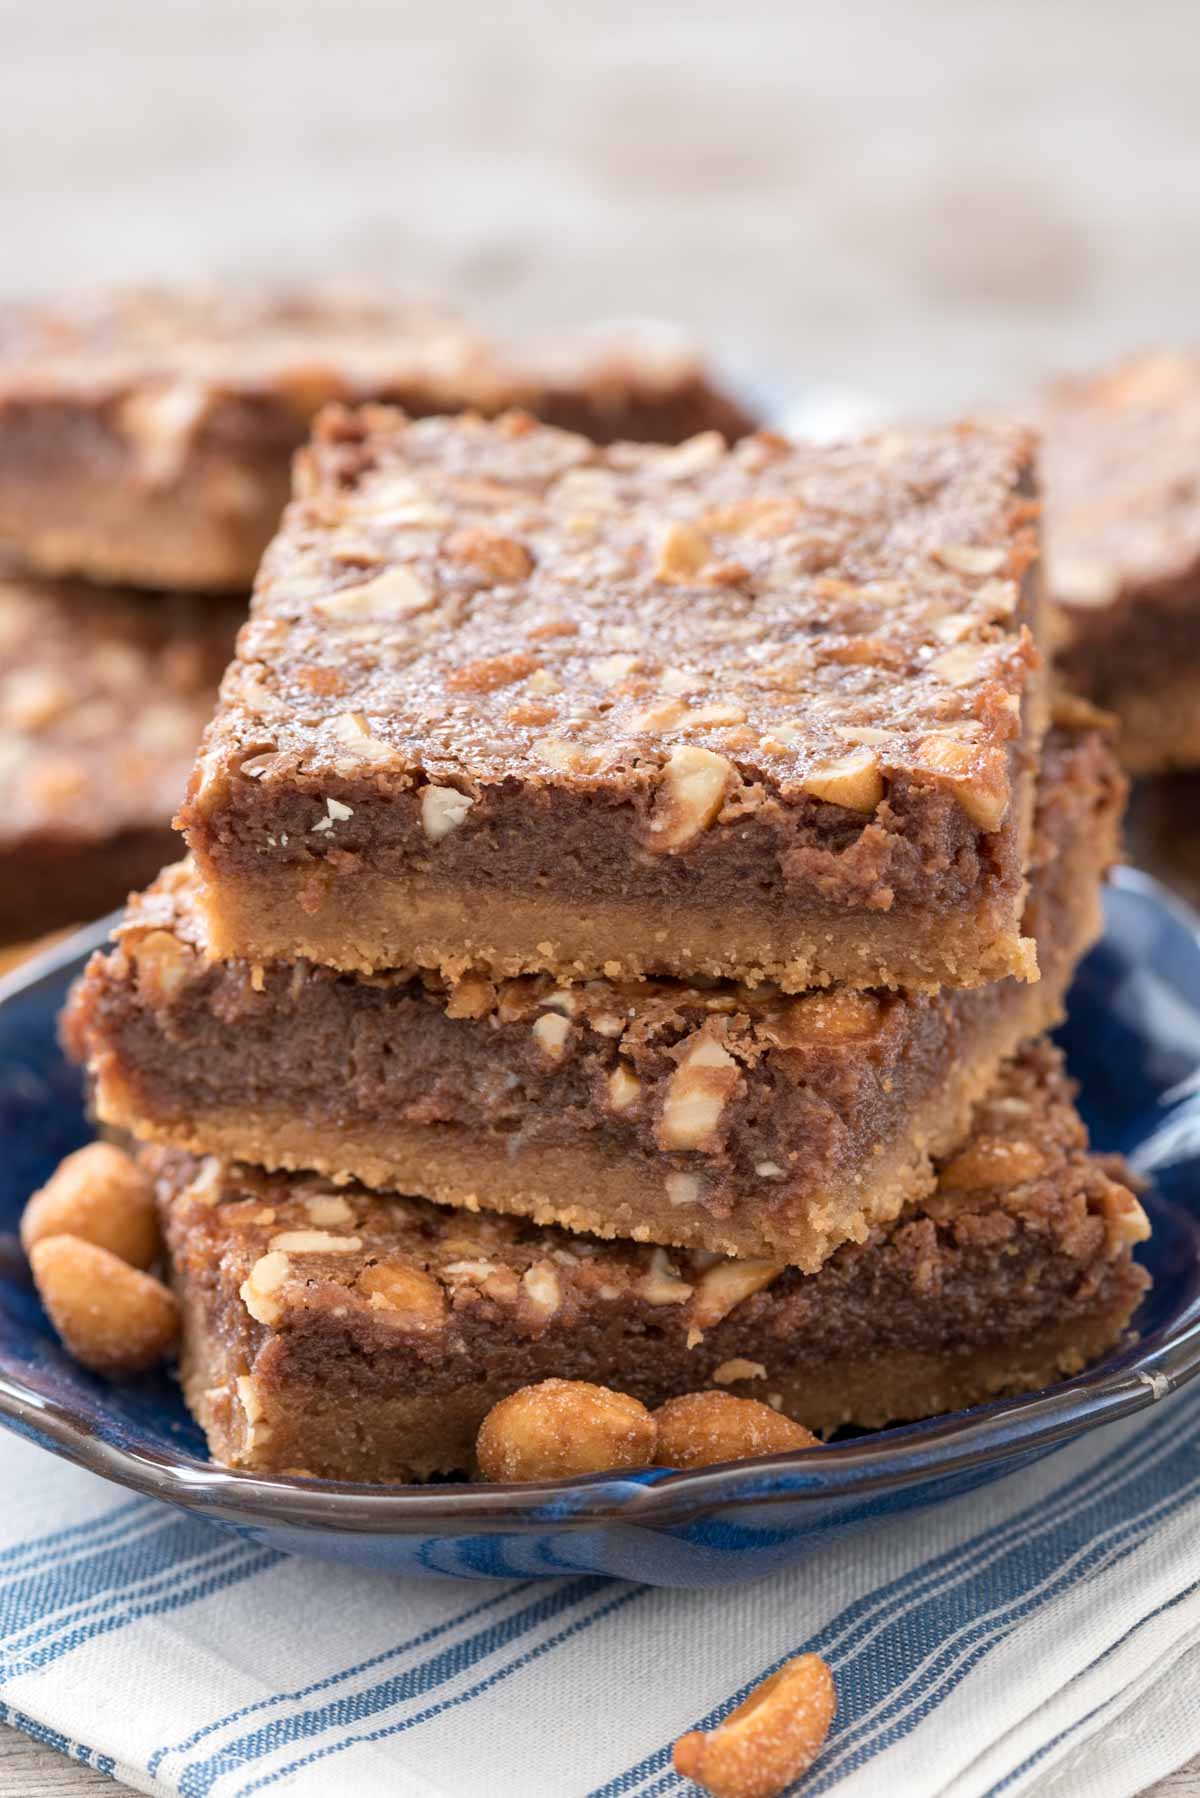 Flourless Peanut Butter Brookies - these chocolate fudge peanut butter cookie bars are accidentally gluten-free and taste like brownie peanut butter cookies!